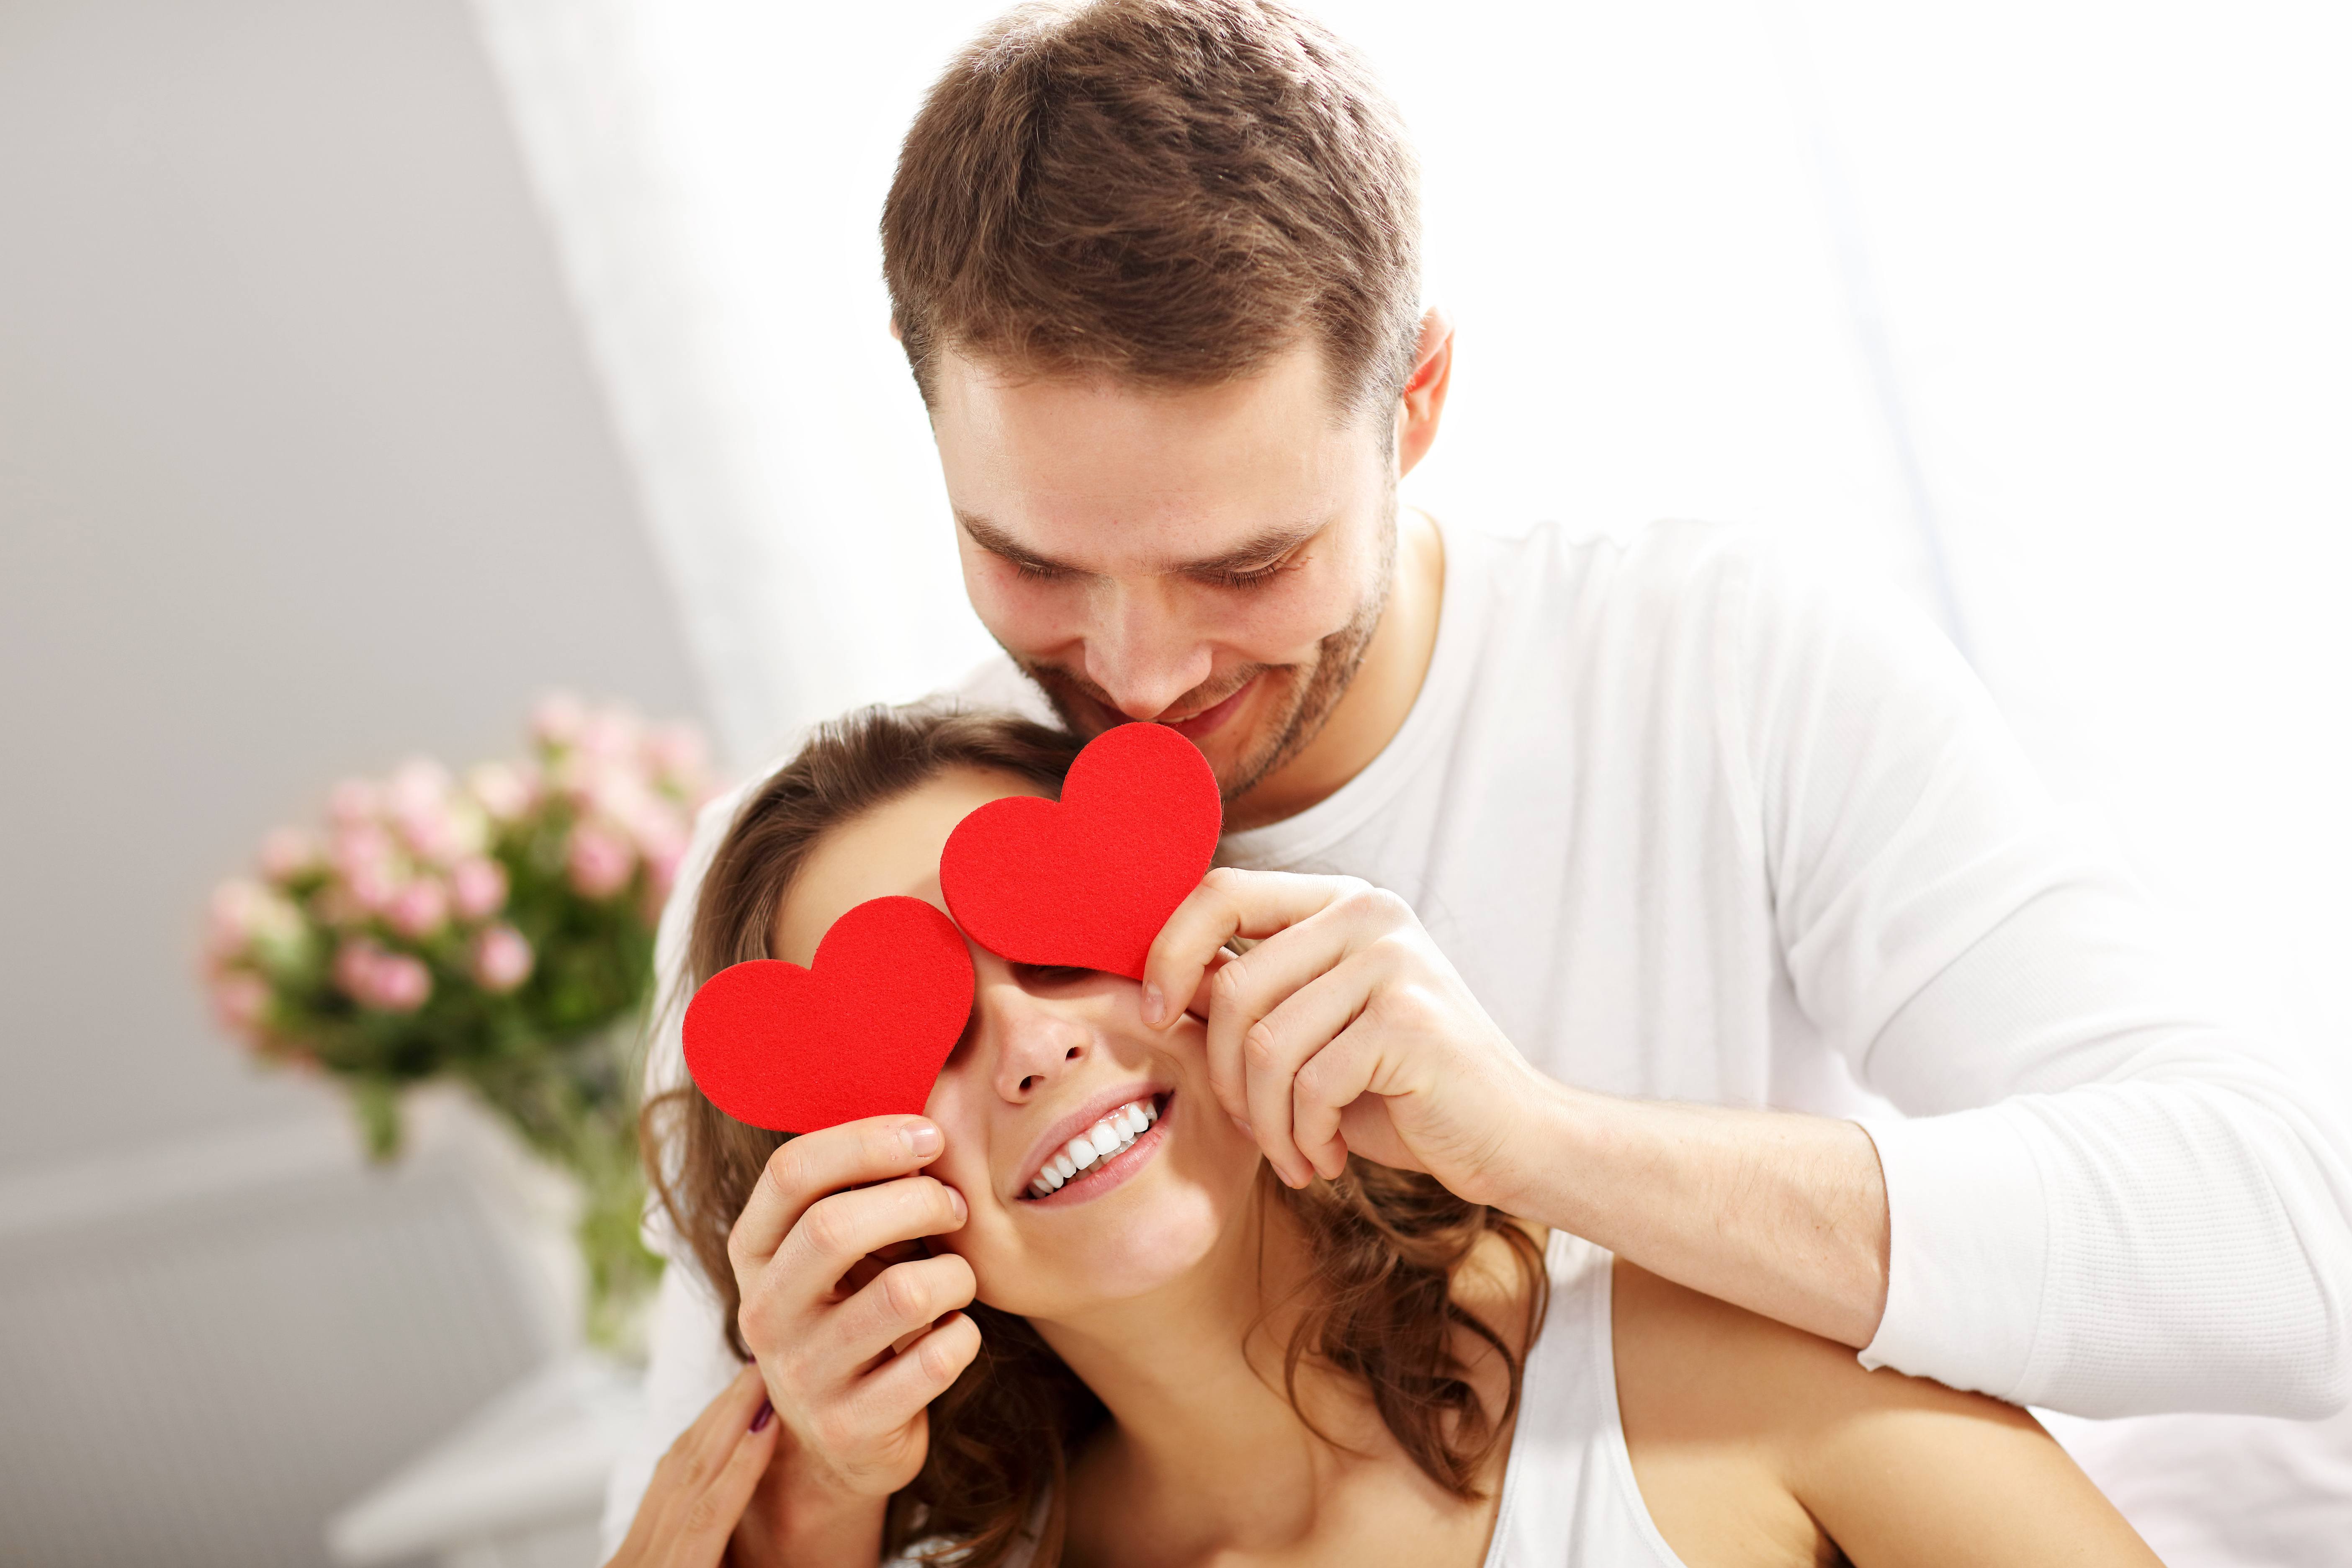 Man holding heart shaped card in front of woman's eyes